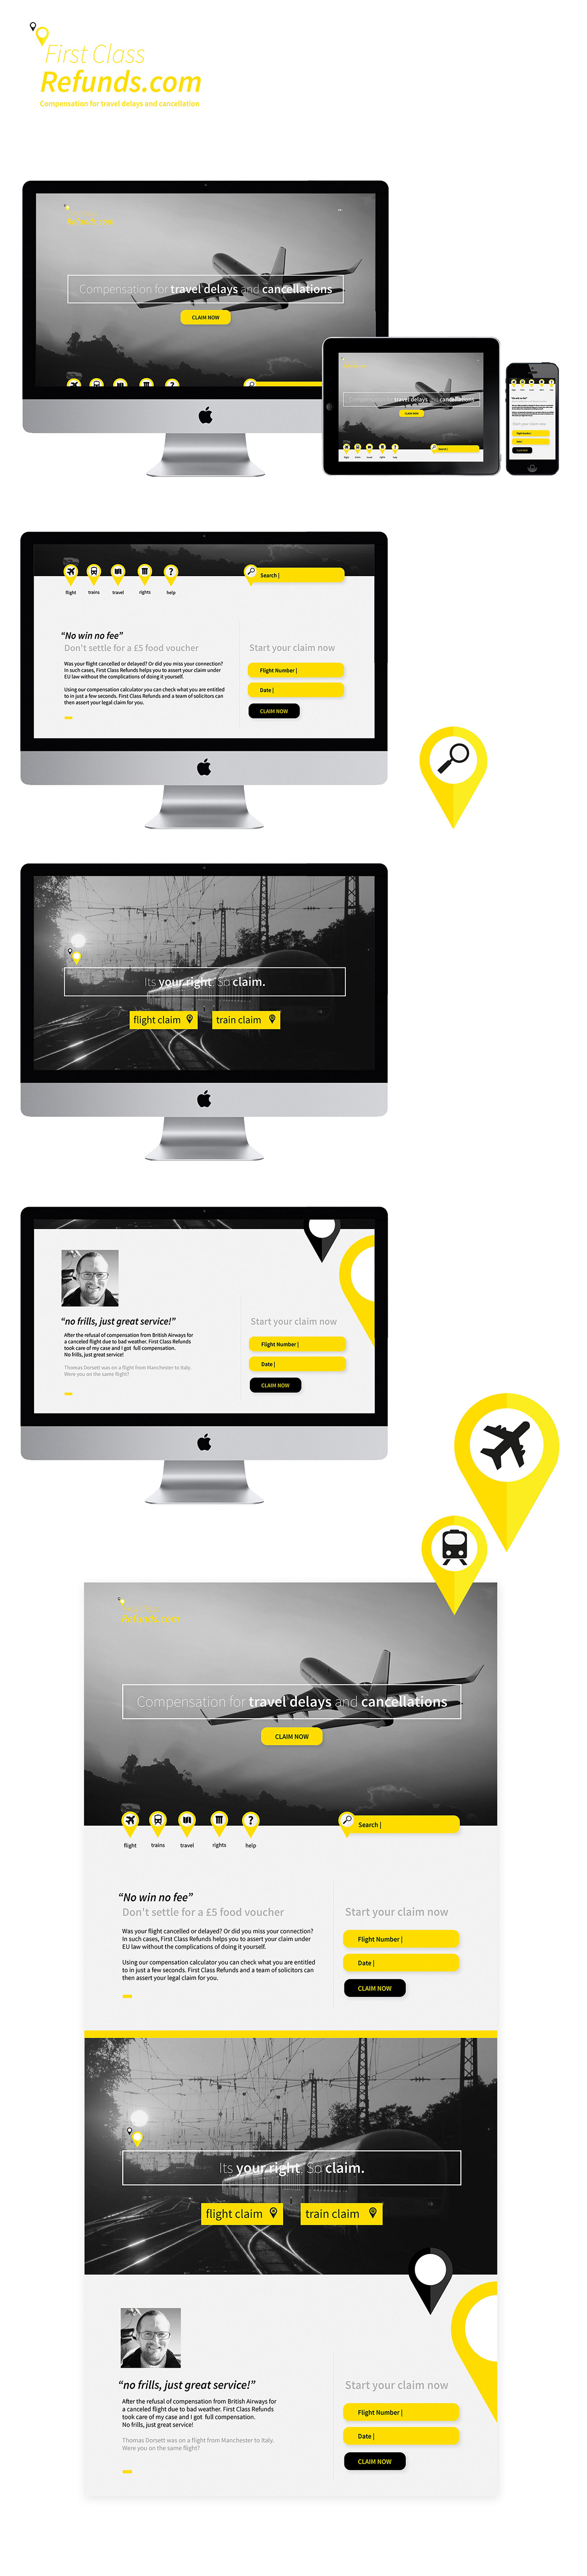 Travel Layout yellow black flight train Claim Web site icons iMac Technology editorial colour contrast